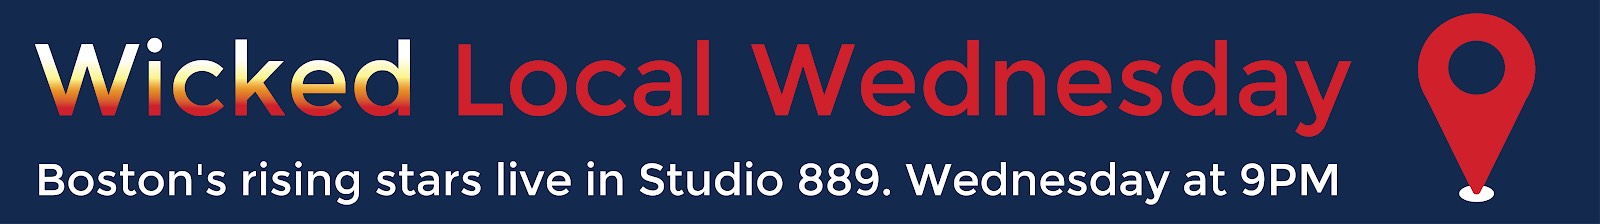 Wicked Local Wednesday, Boston's rising stars live in studio 889, Wednesday at 9 p.m.